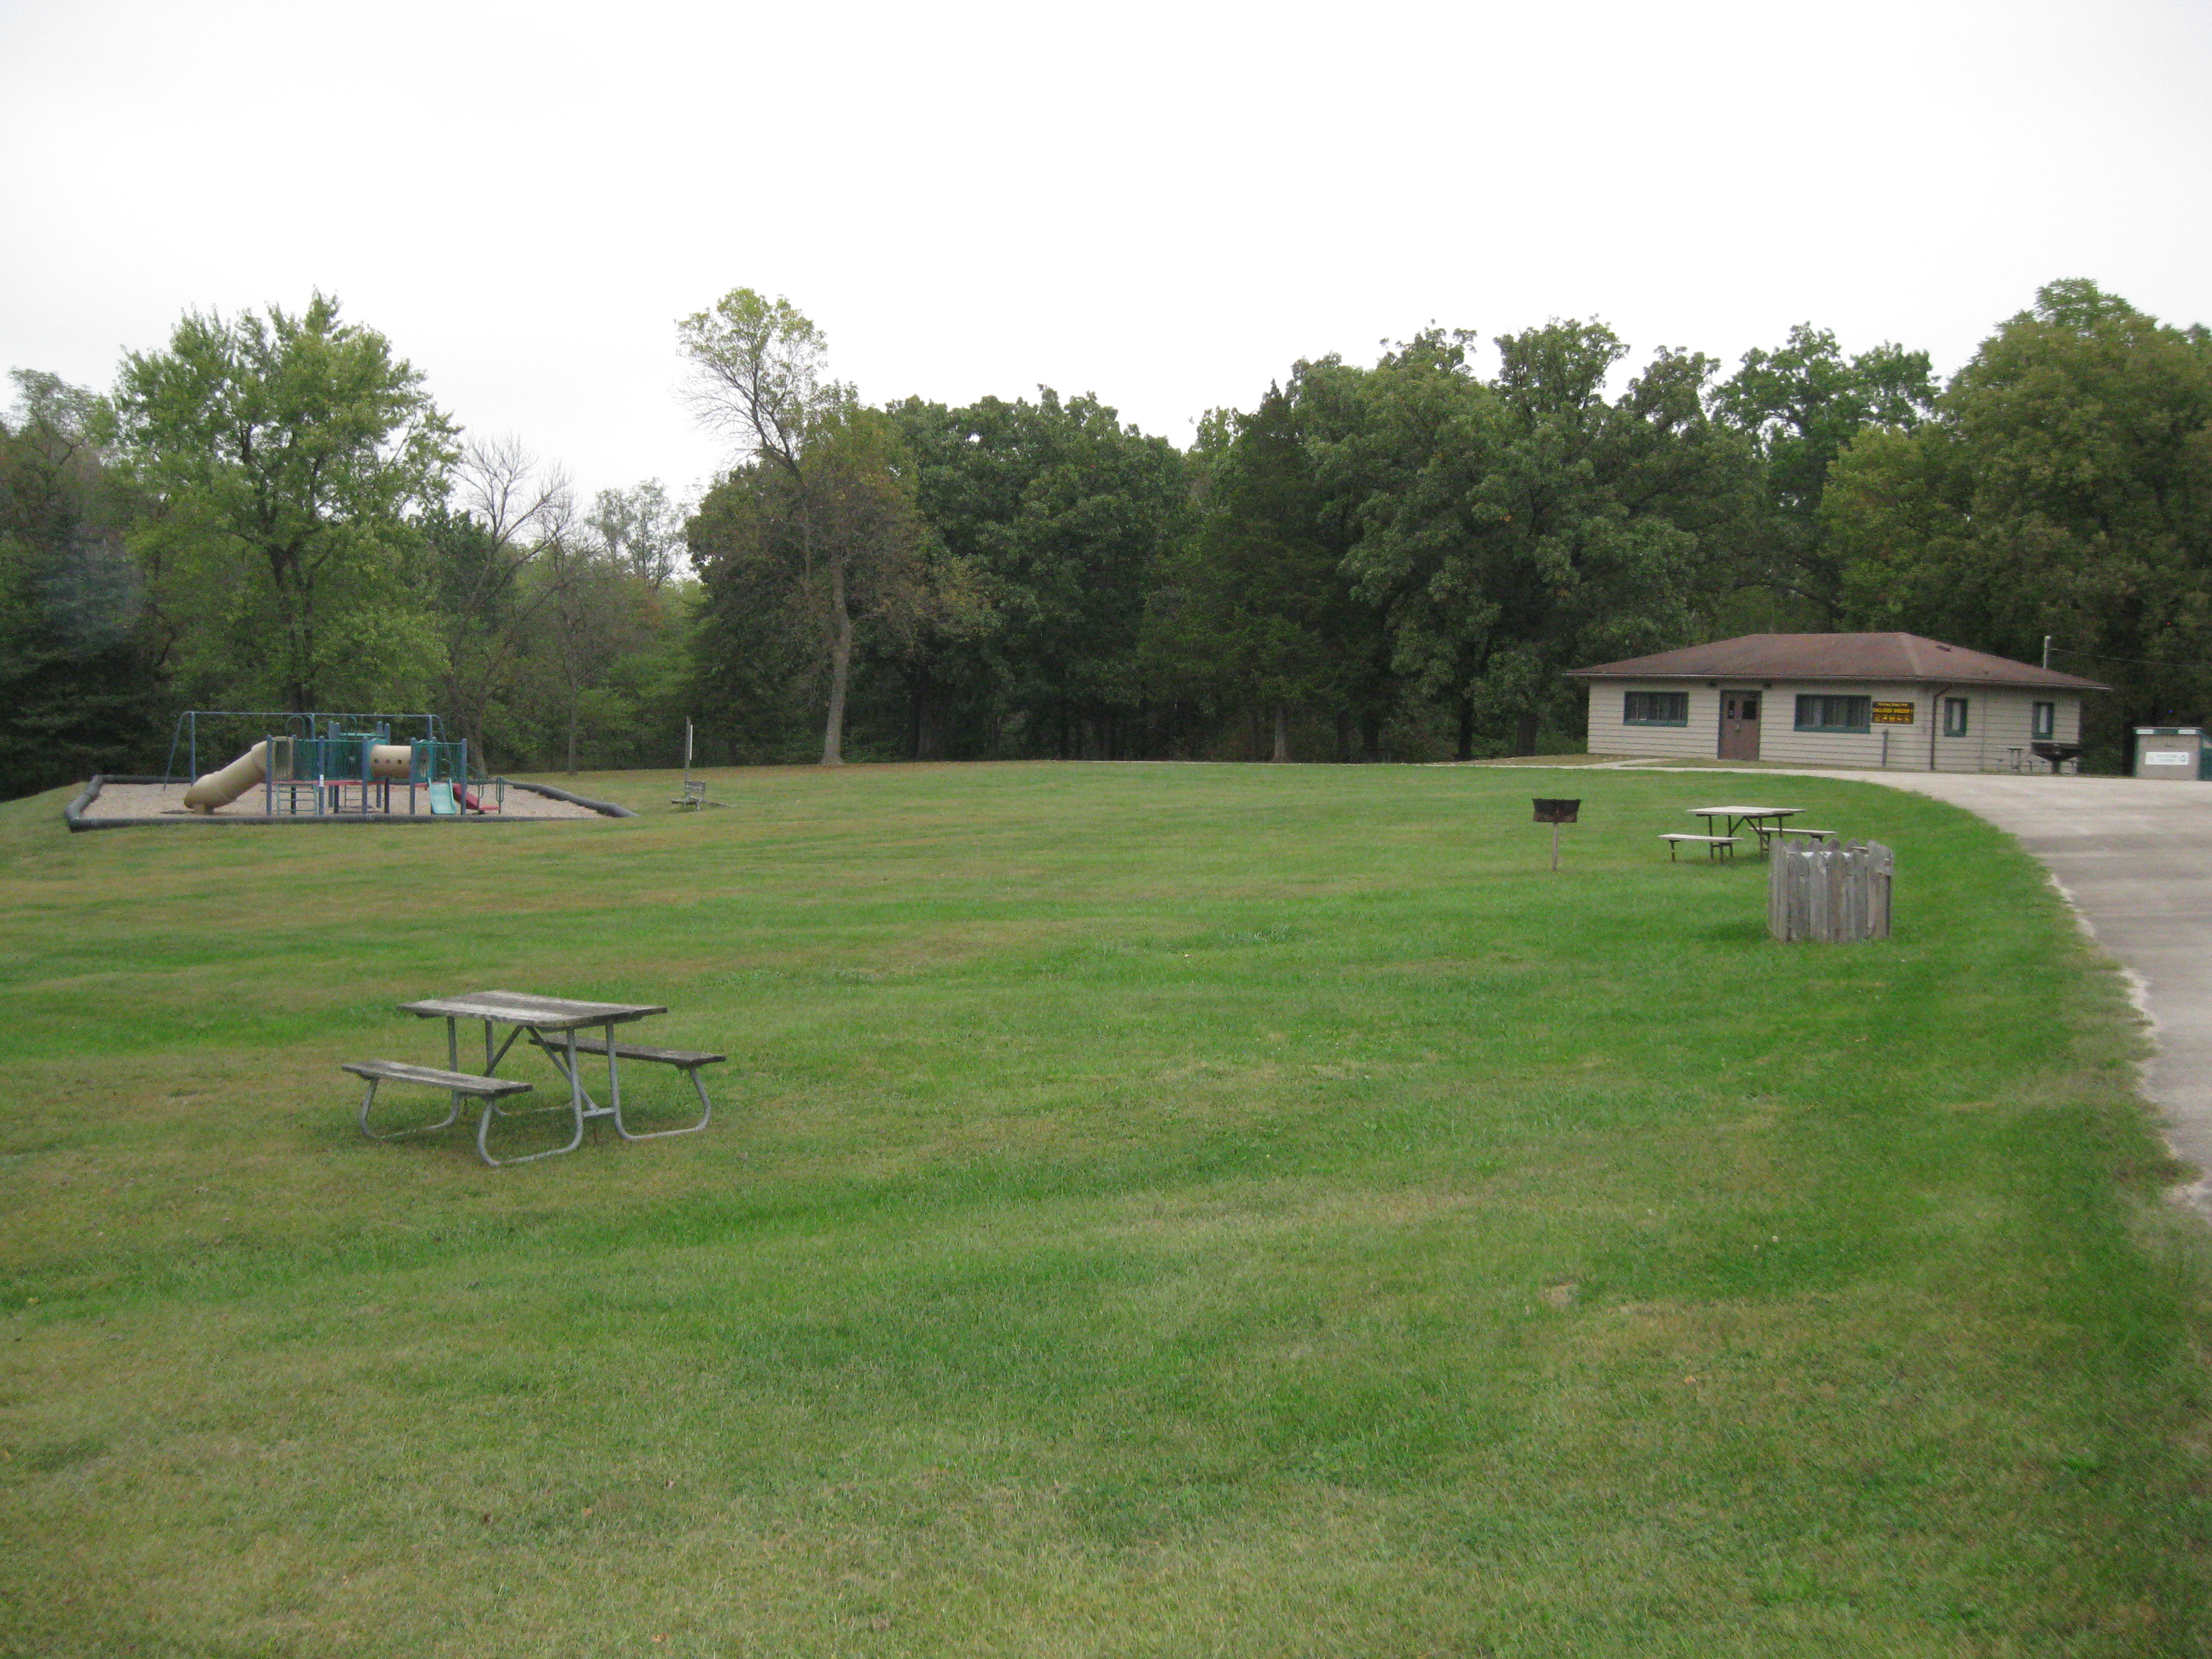 Picnic tables, playground and grill in field and enclosed shelter in the distance